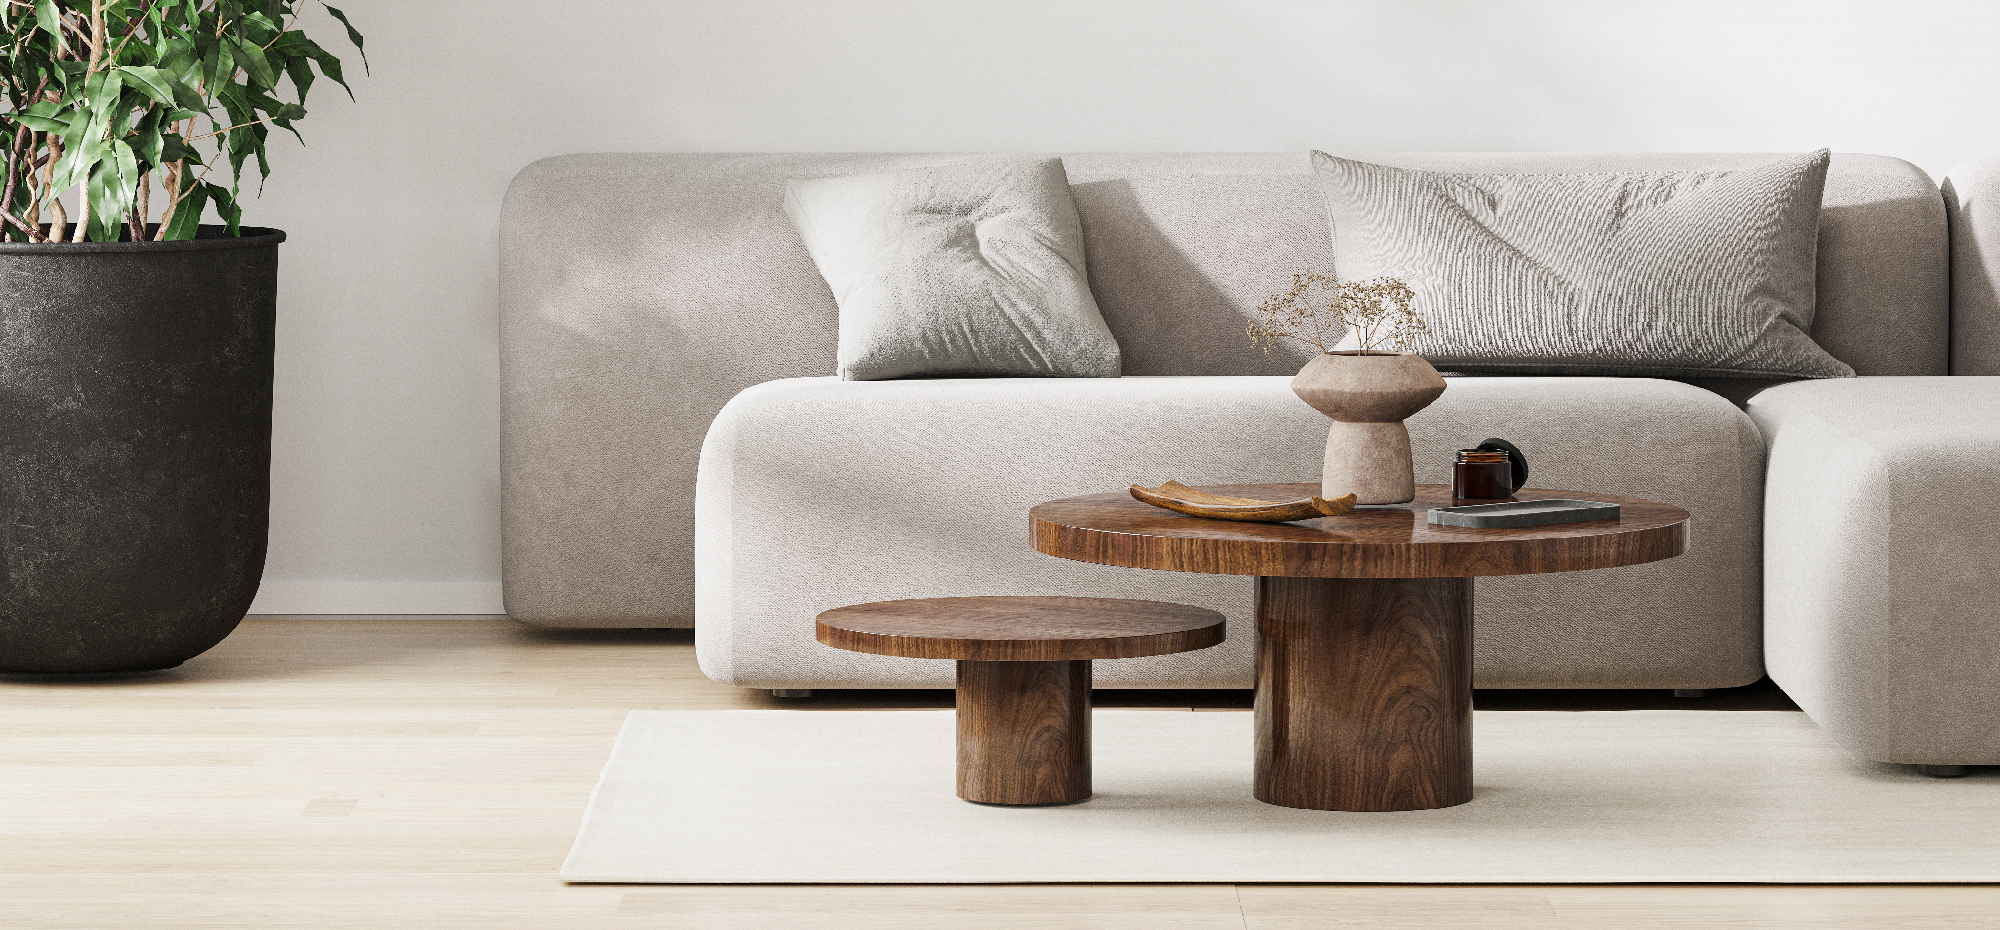 Sofa with wooden table aesthetic